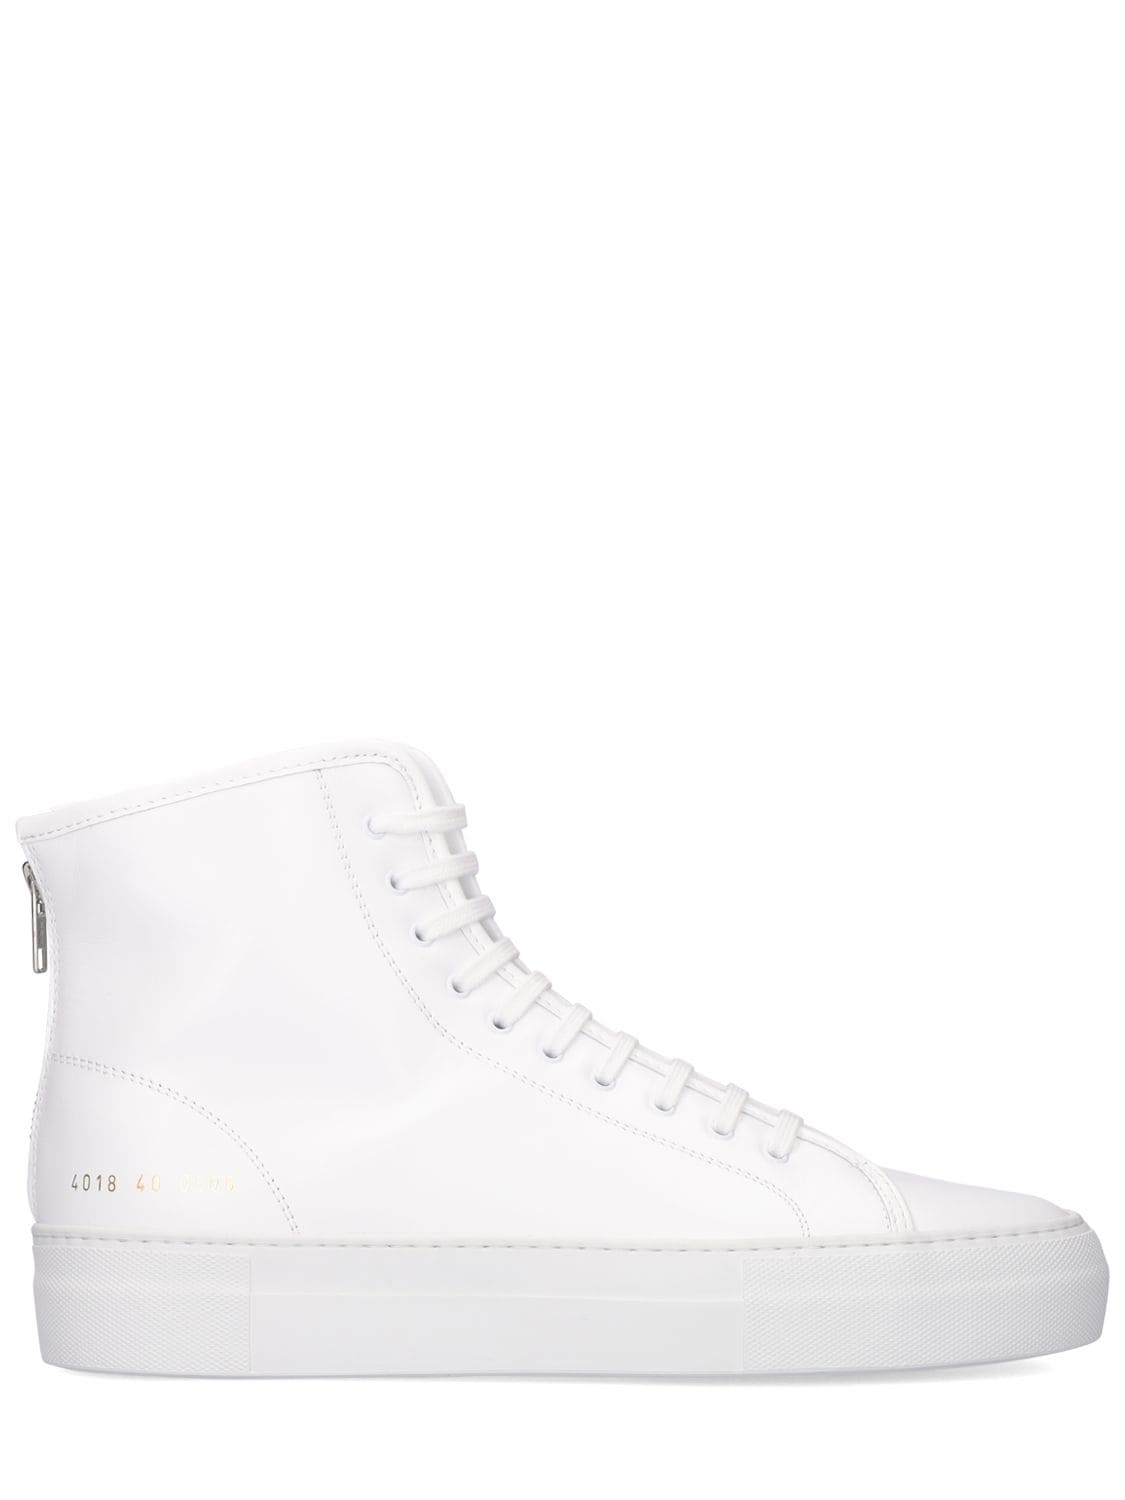 Tournament Super High Leather Sneakers - COMMON PROJECTS - Modalova